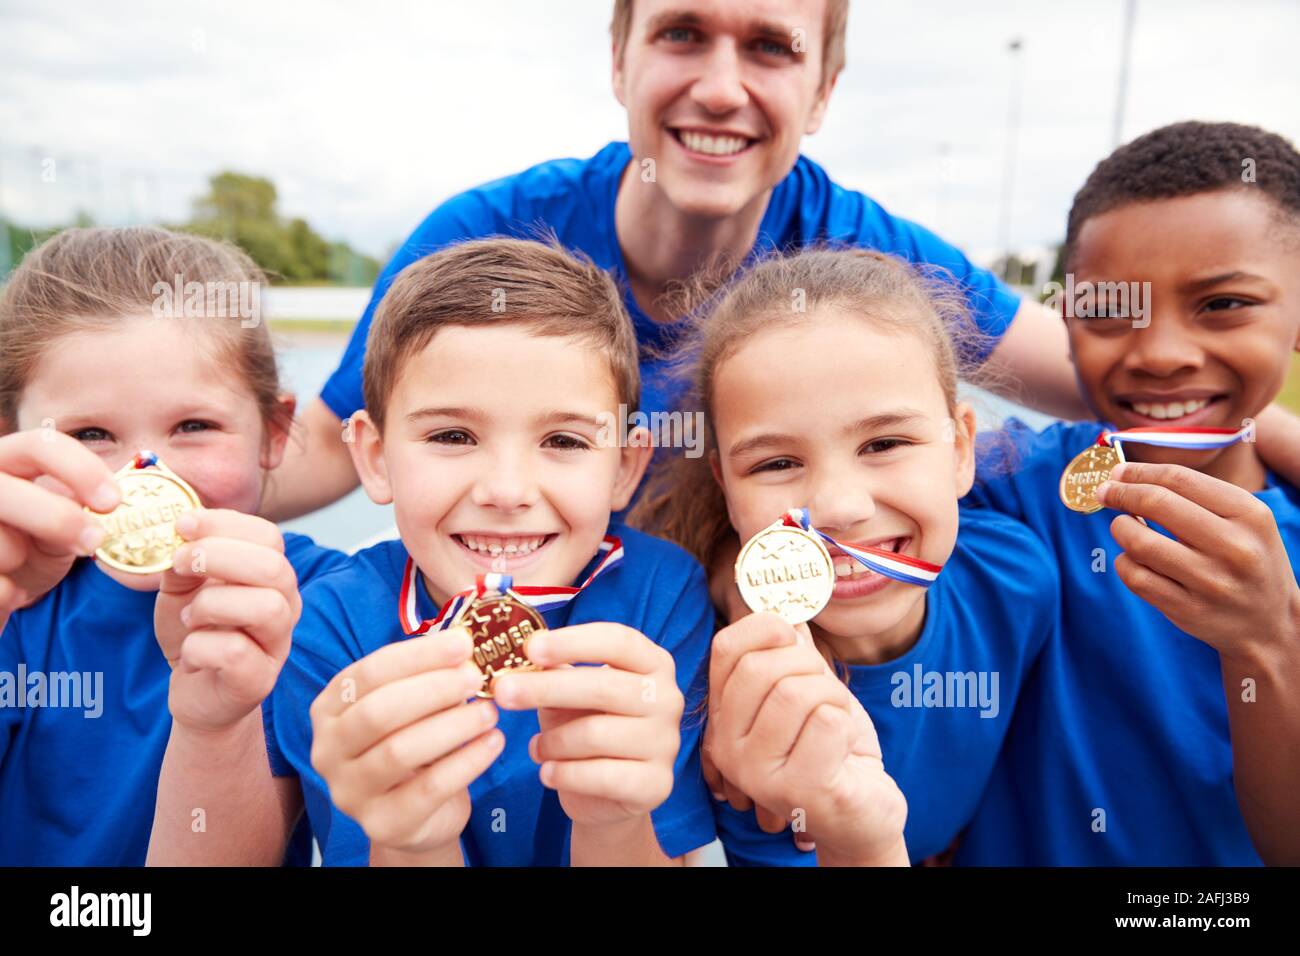 Portrait Of Children With Male Coach Showing Off Winners Medals On Sports Day Stock Photo